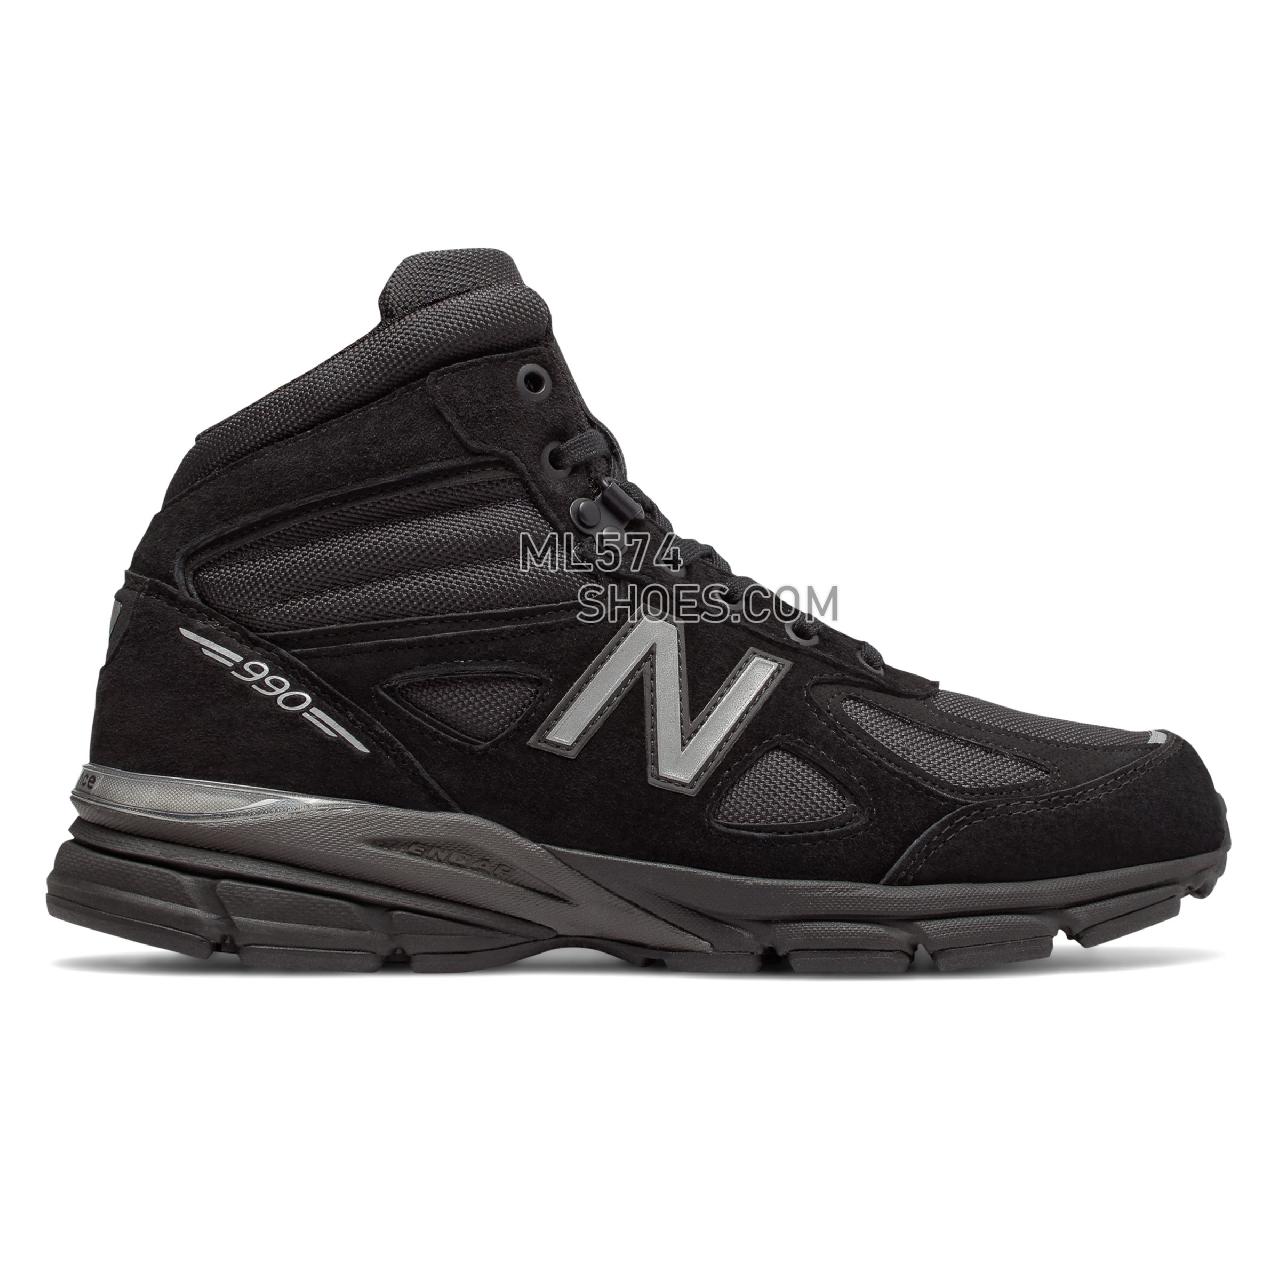 New Balance Mens 990v4 Mid Made in US - Men's 990 - Boots Black with Grey - MO990BK4